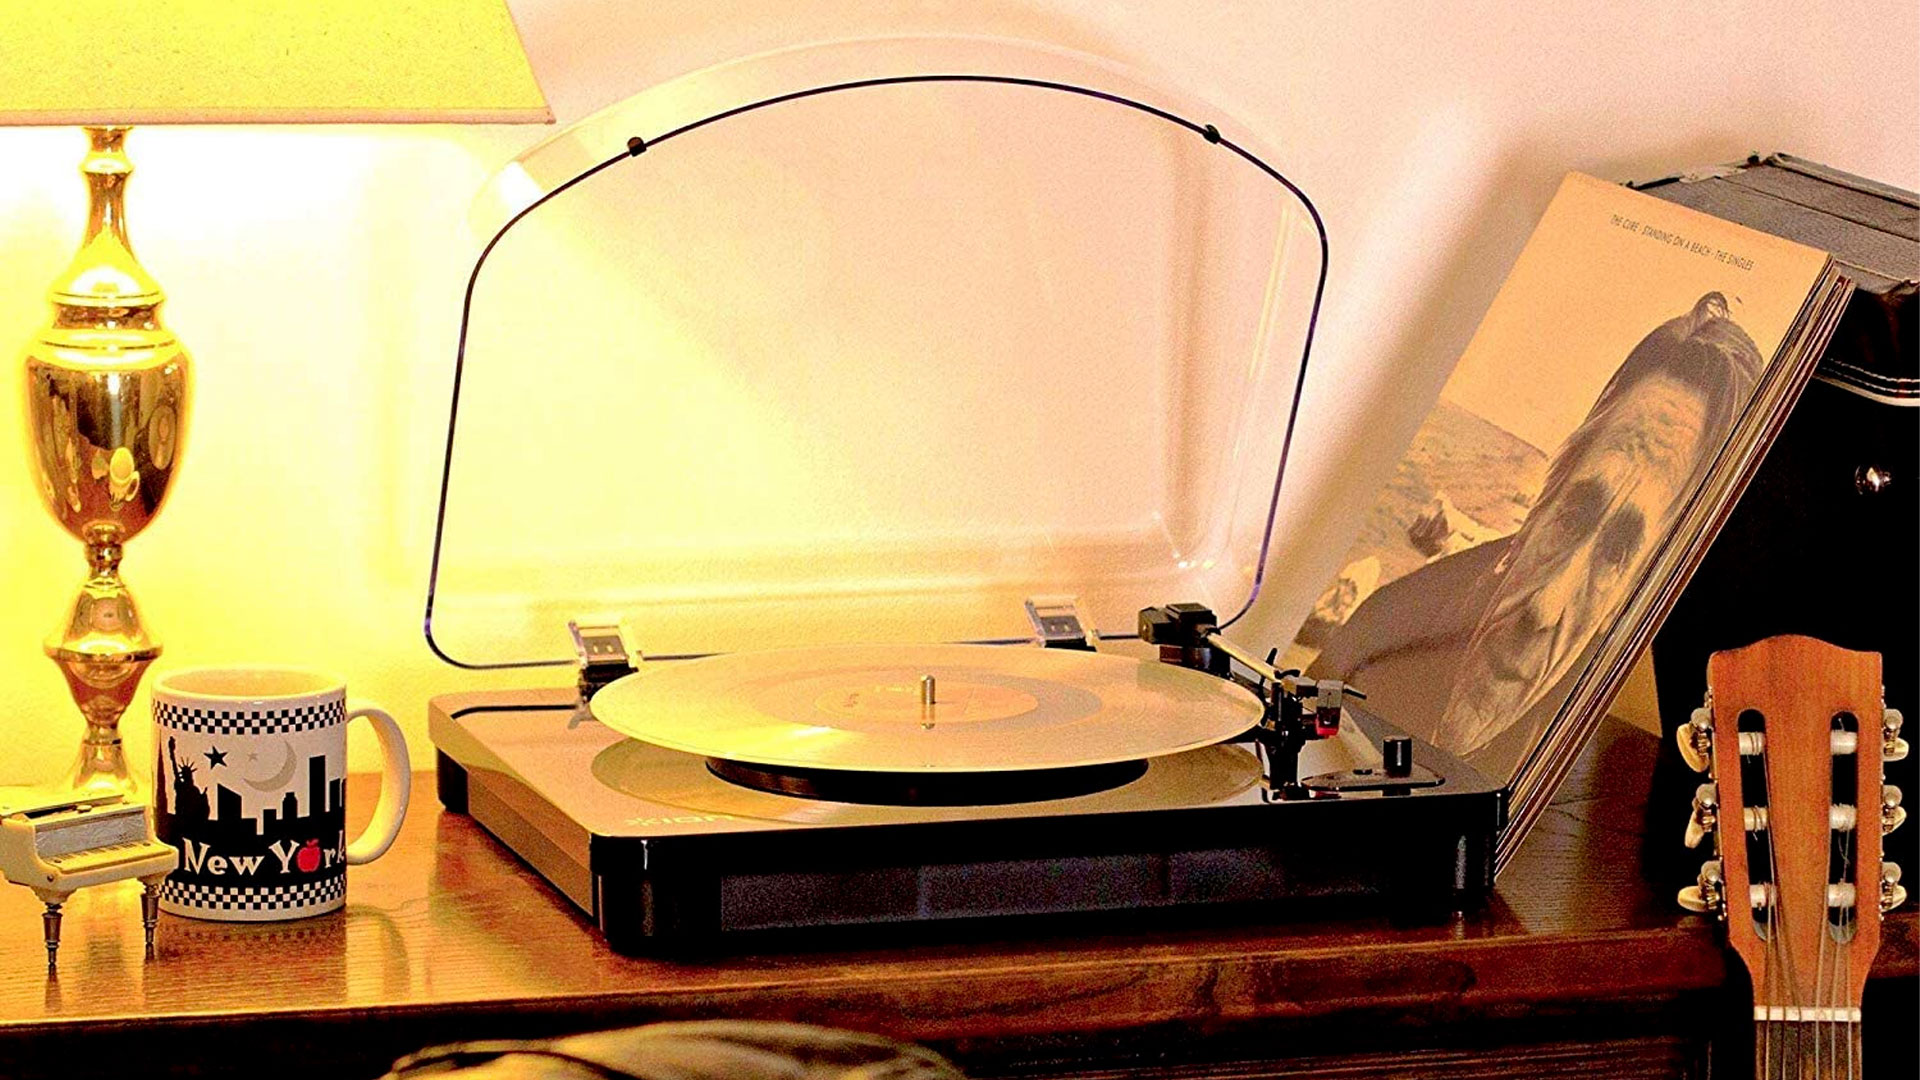 ion bluetooth record player